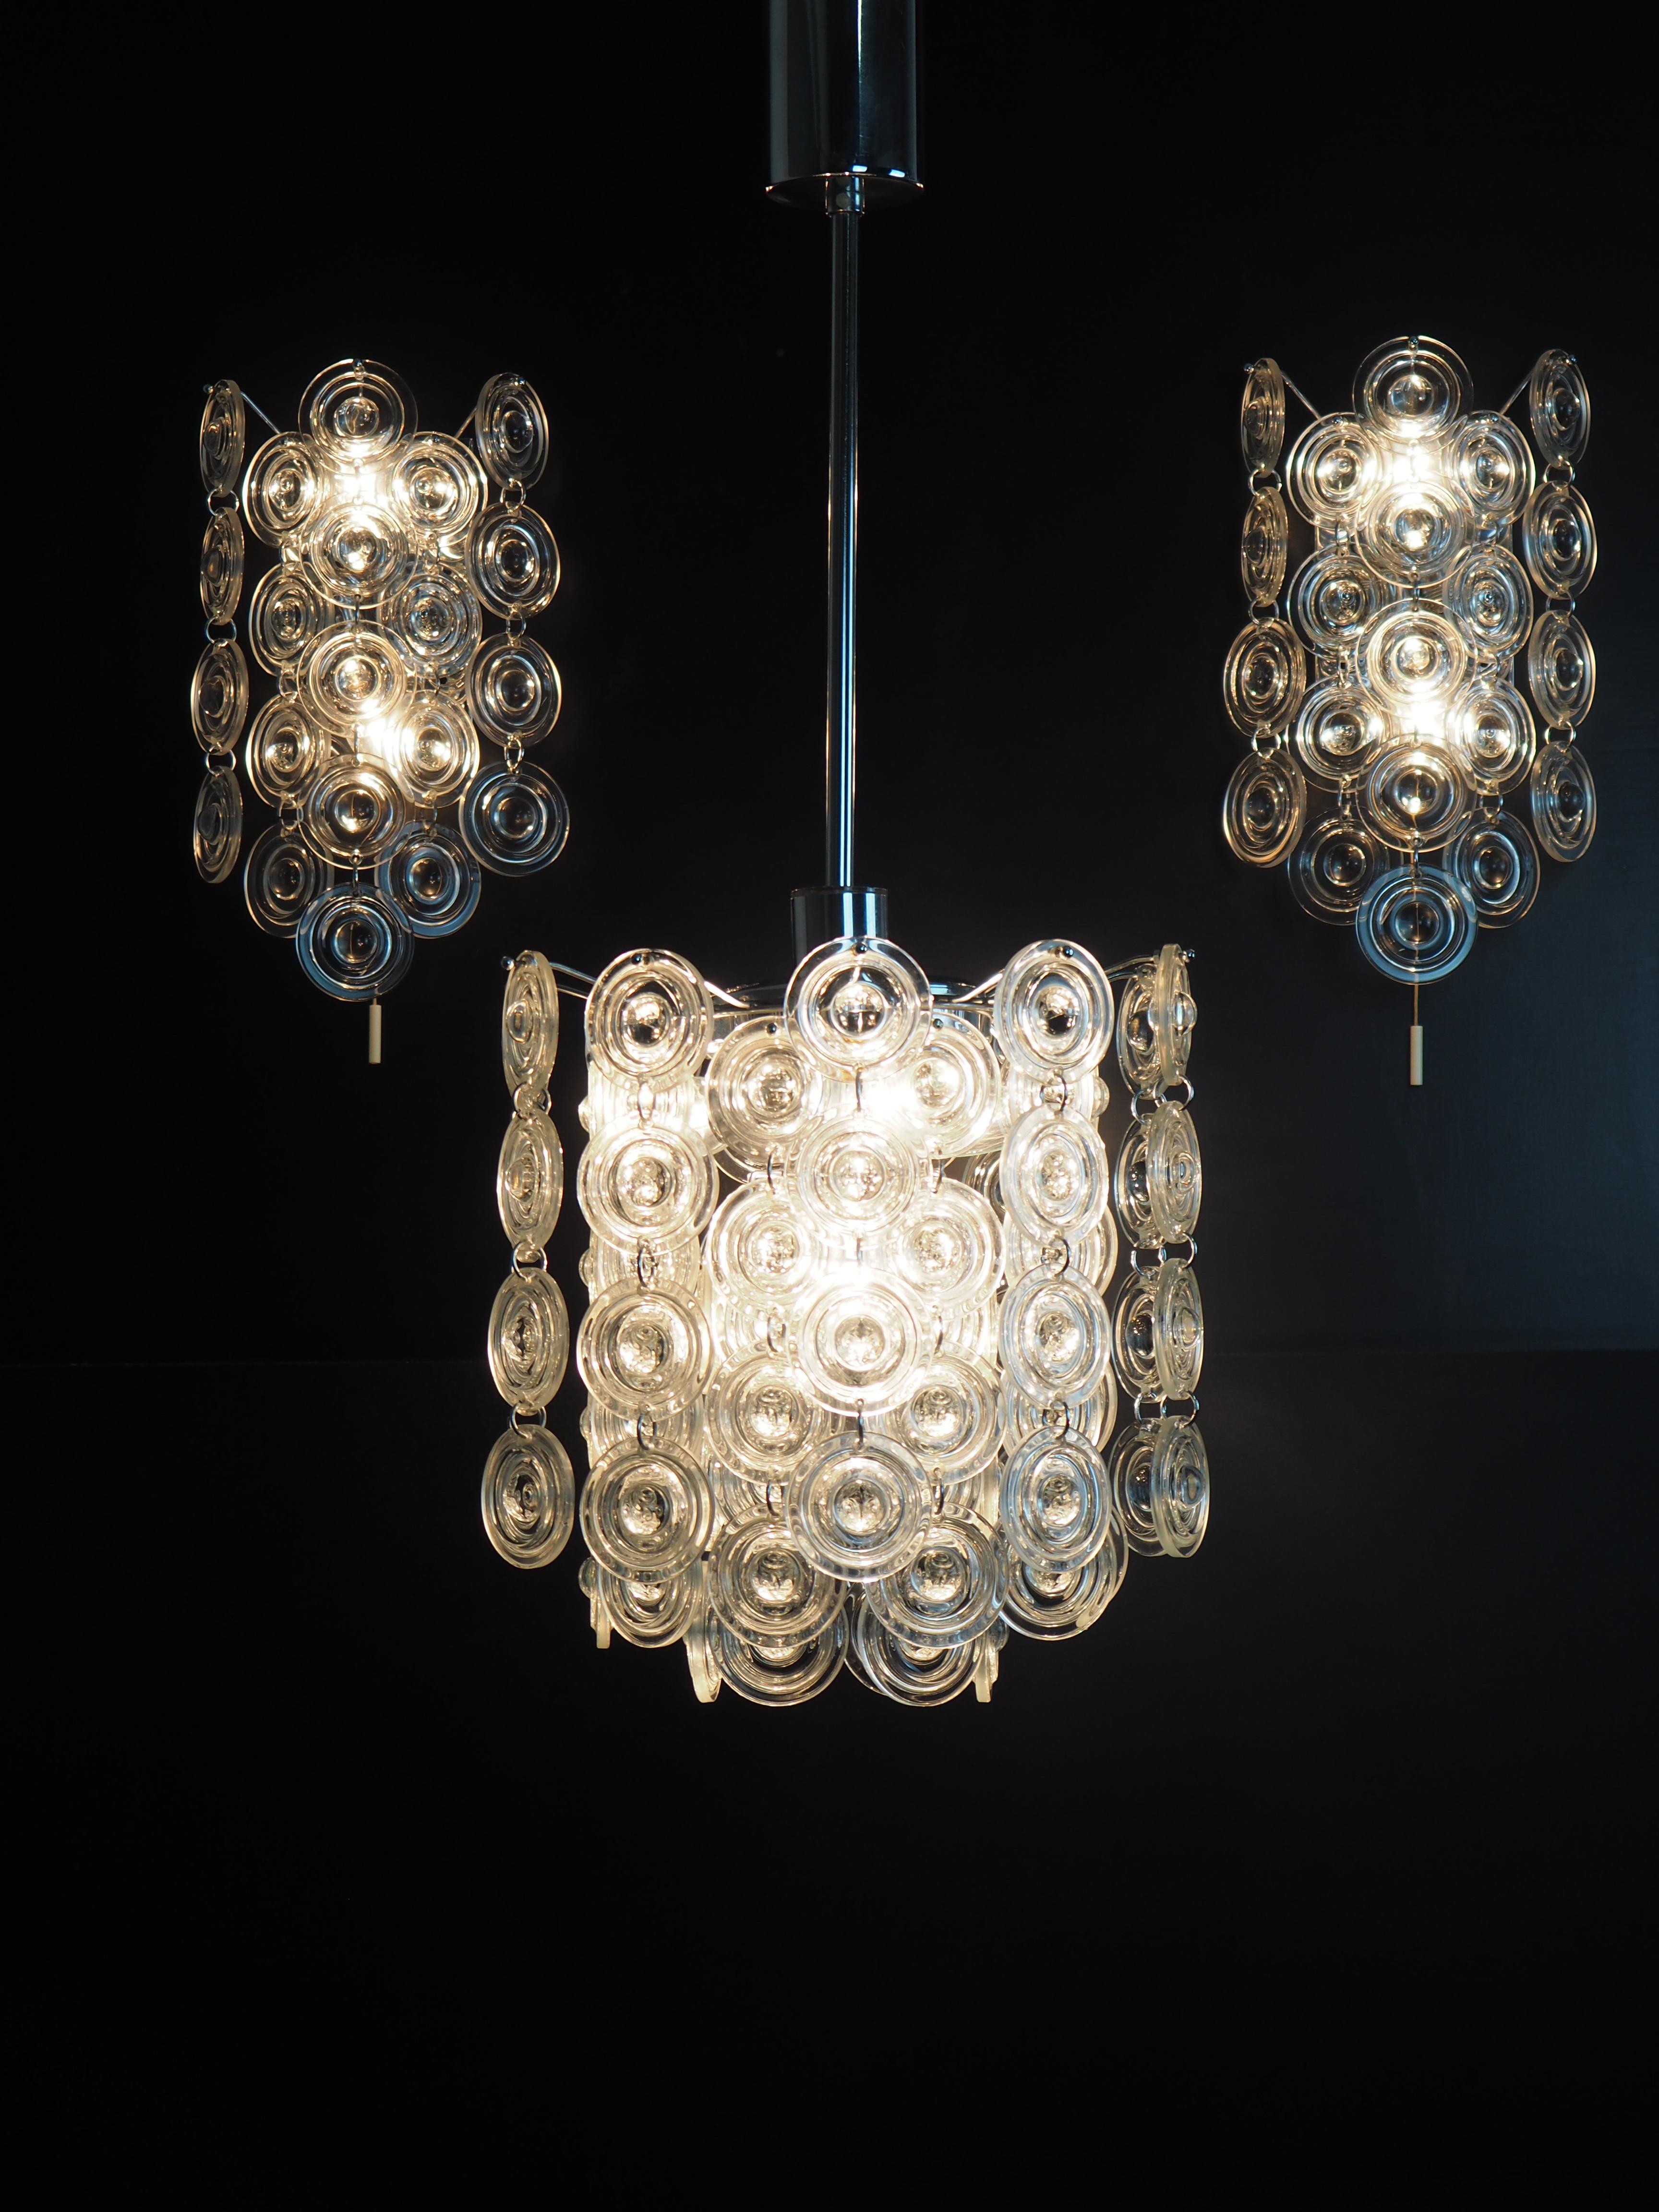 Italian Rare Set of Glass and Nickel Light Fixtures by Sciolari, circa 1970s For Sale